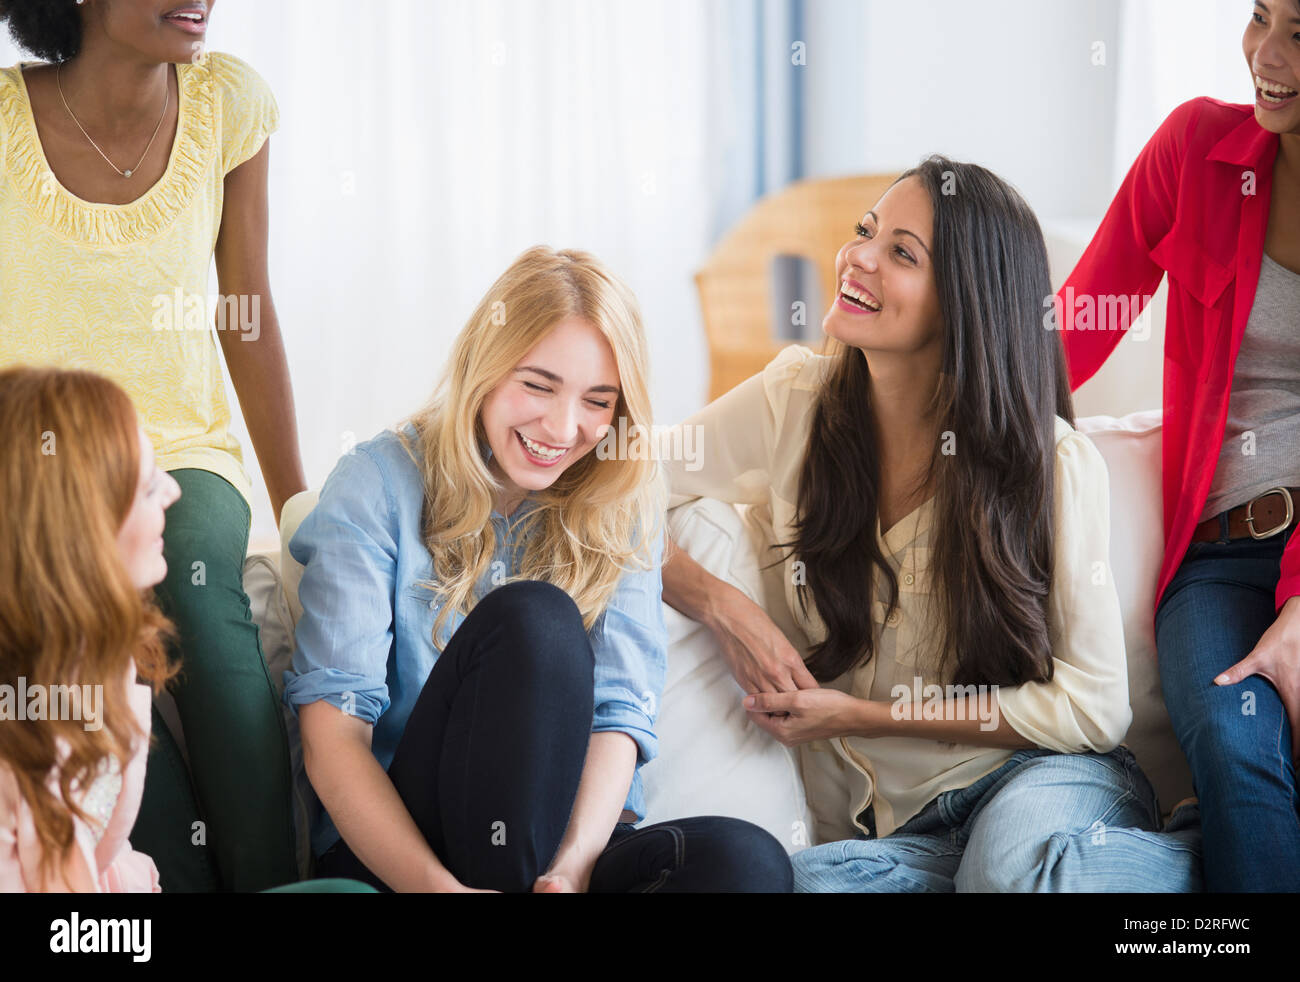 Smiling woman on sofa Banque D'Images